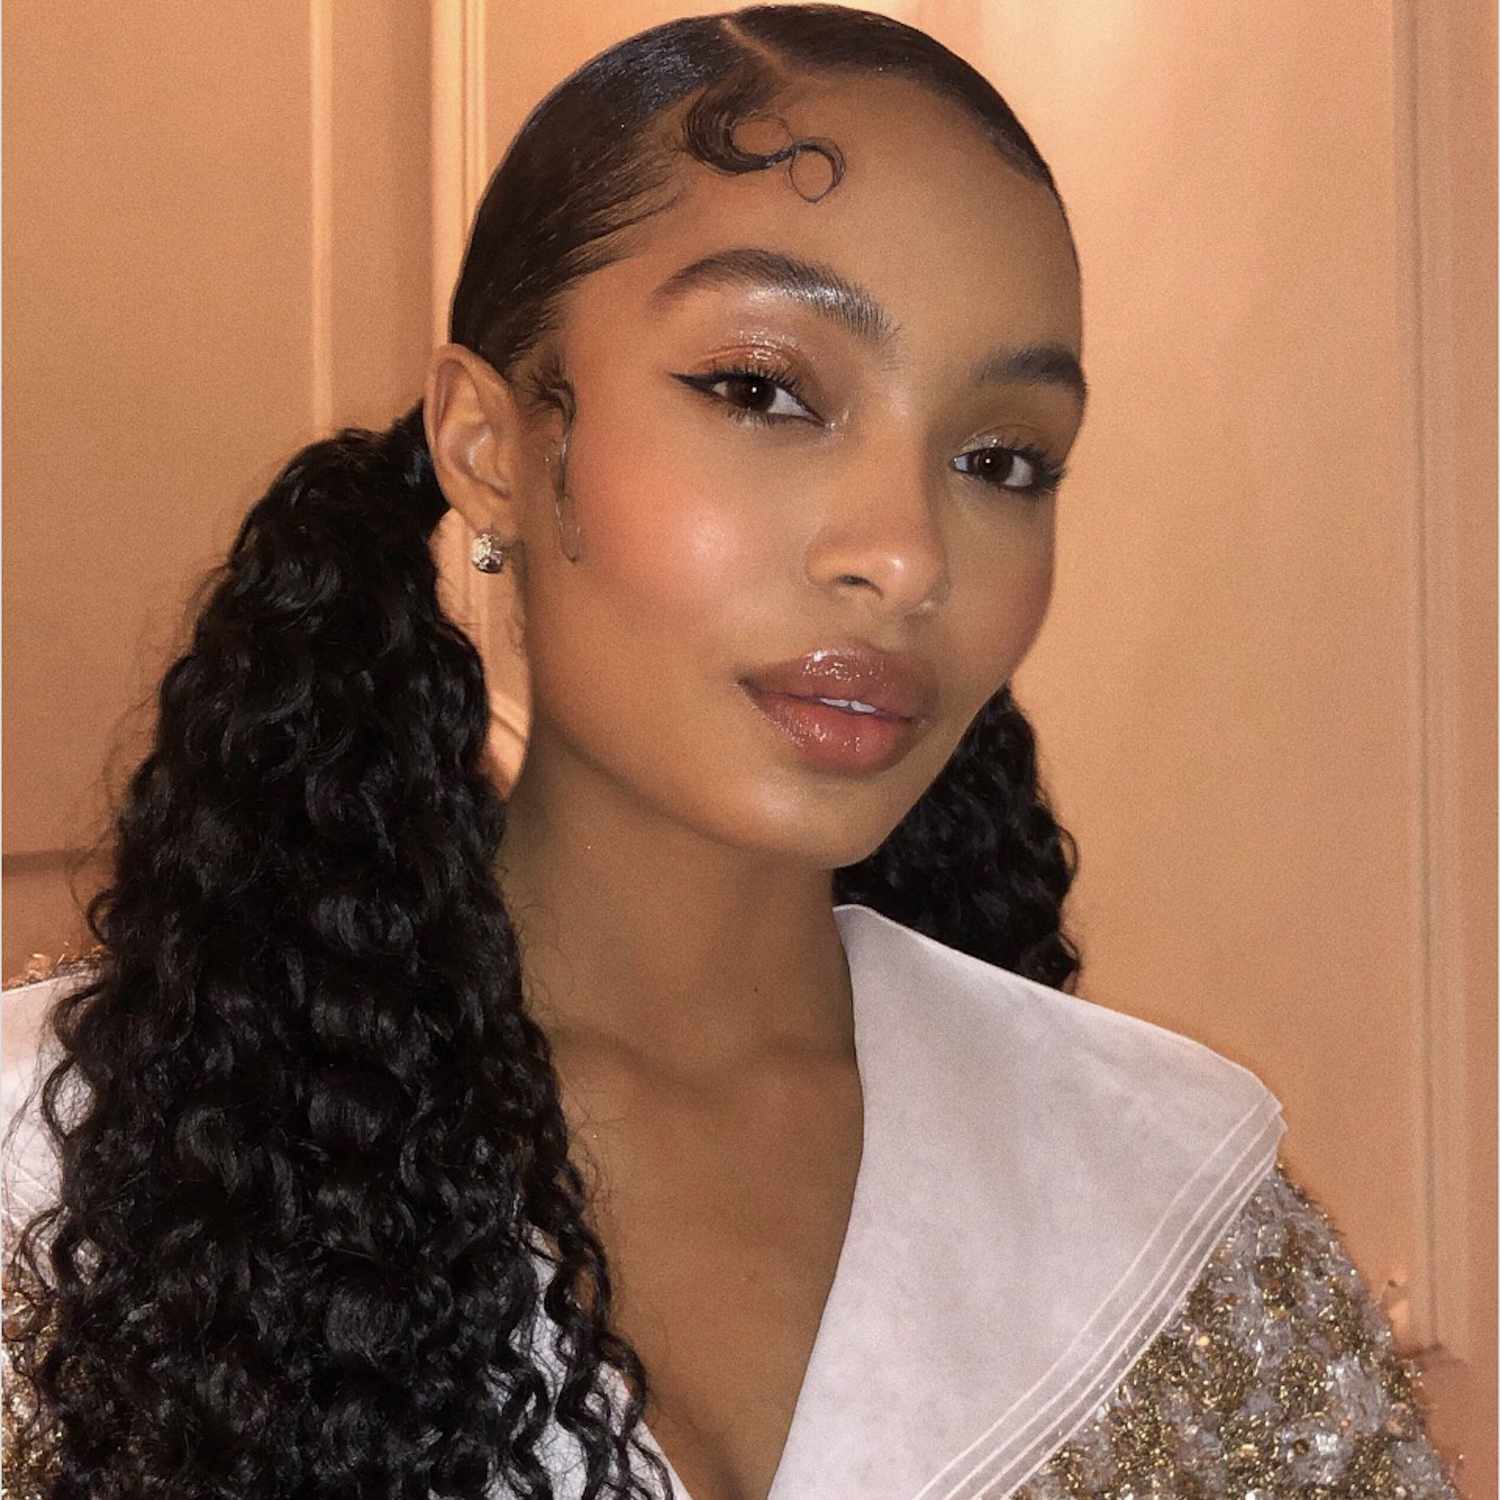 Yara Shahidi wears a curly low pigtail hairstyle with styled edges